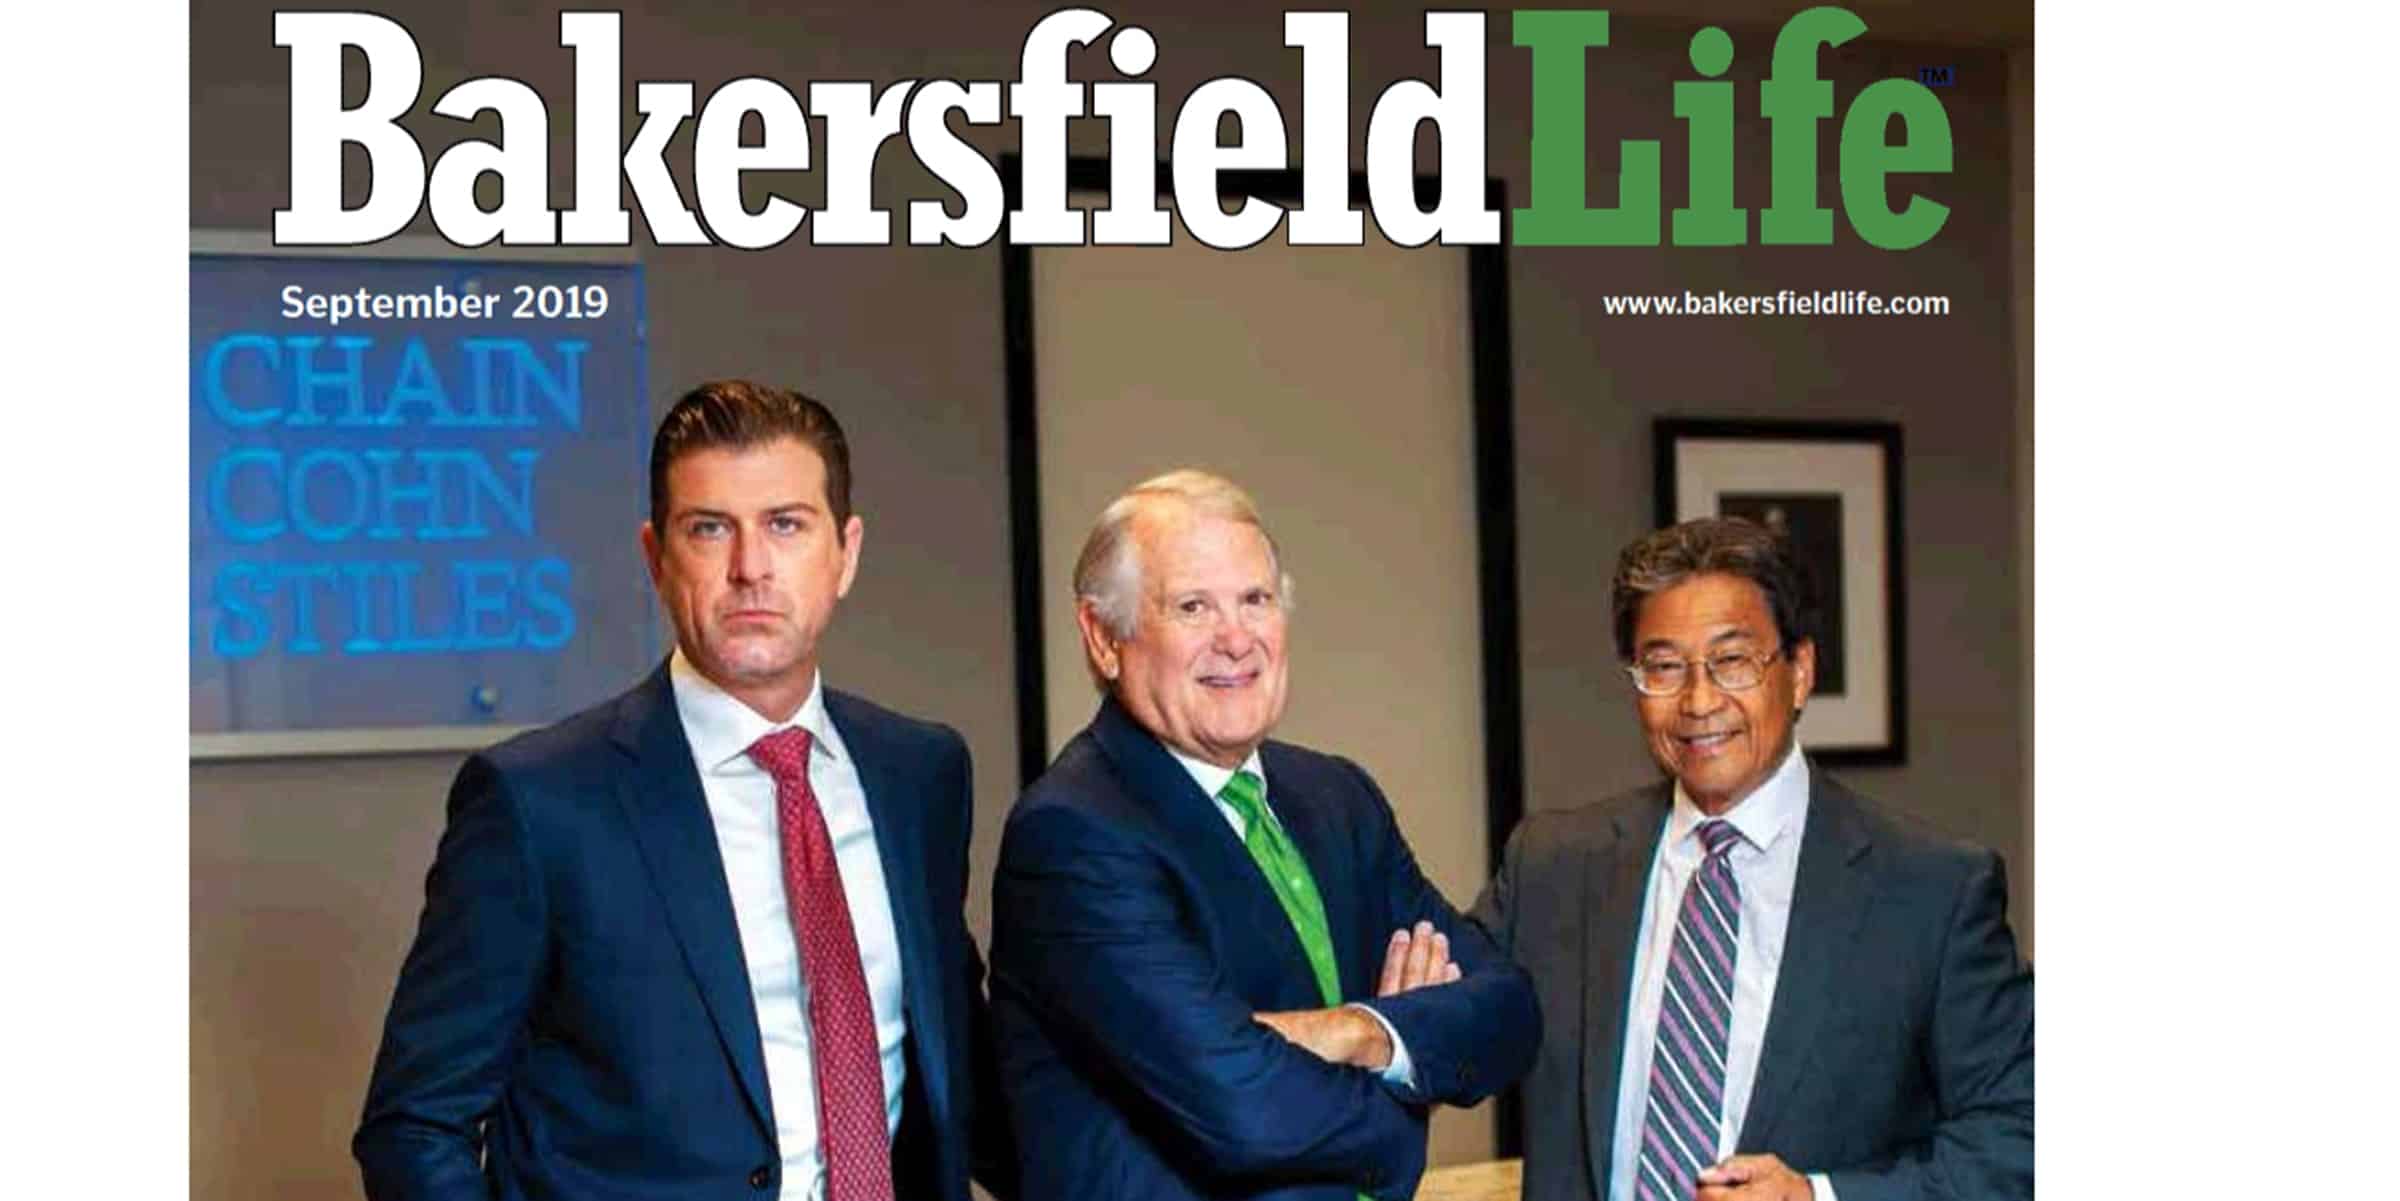 Chain | Cohn | Clark featured in Bakersfield Life Magazine